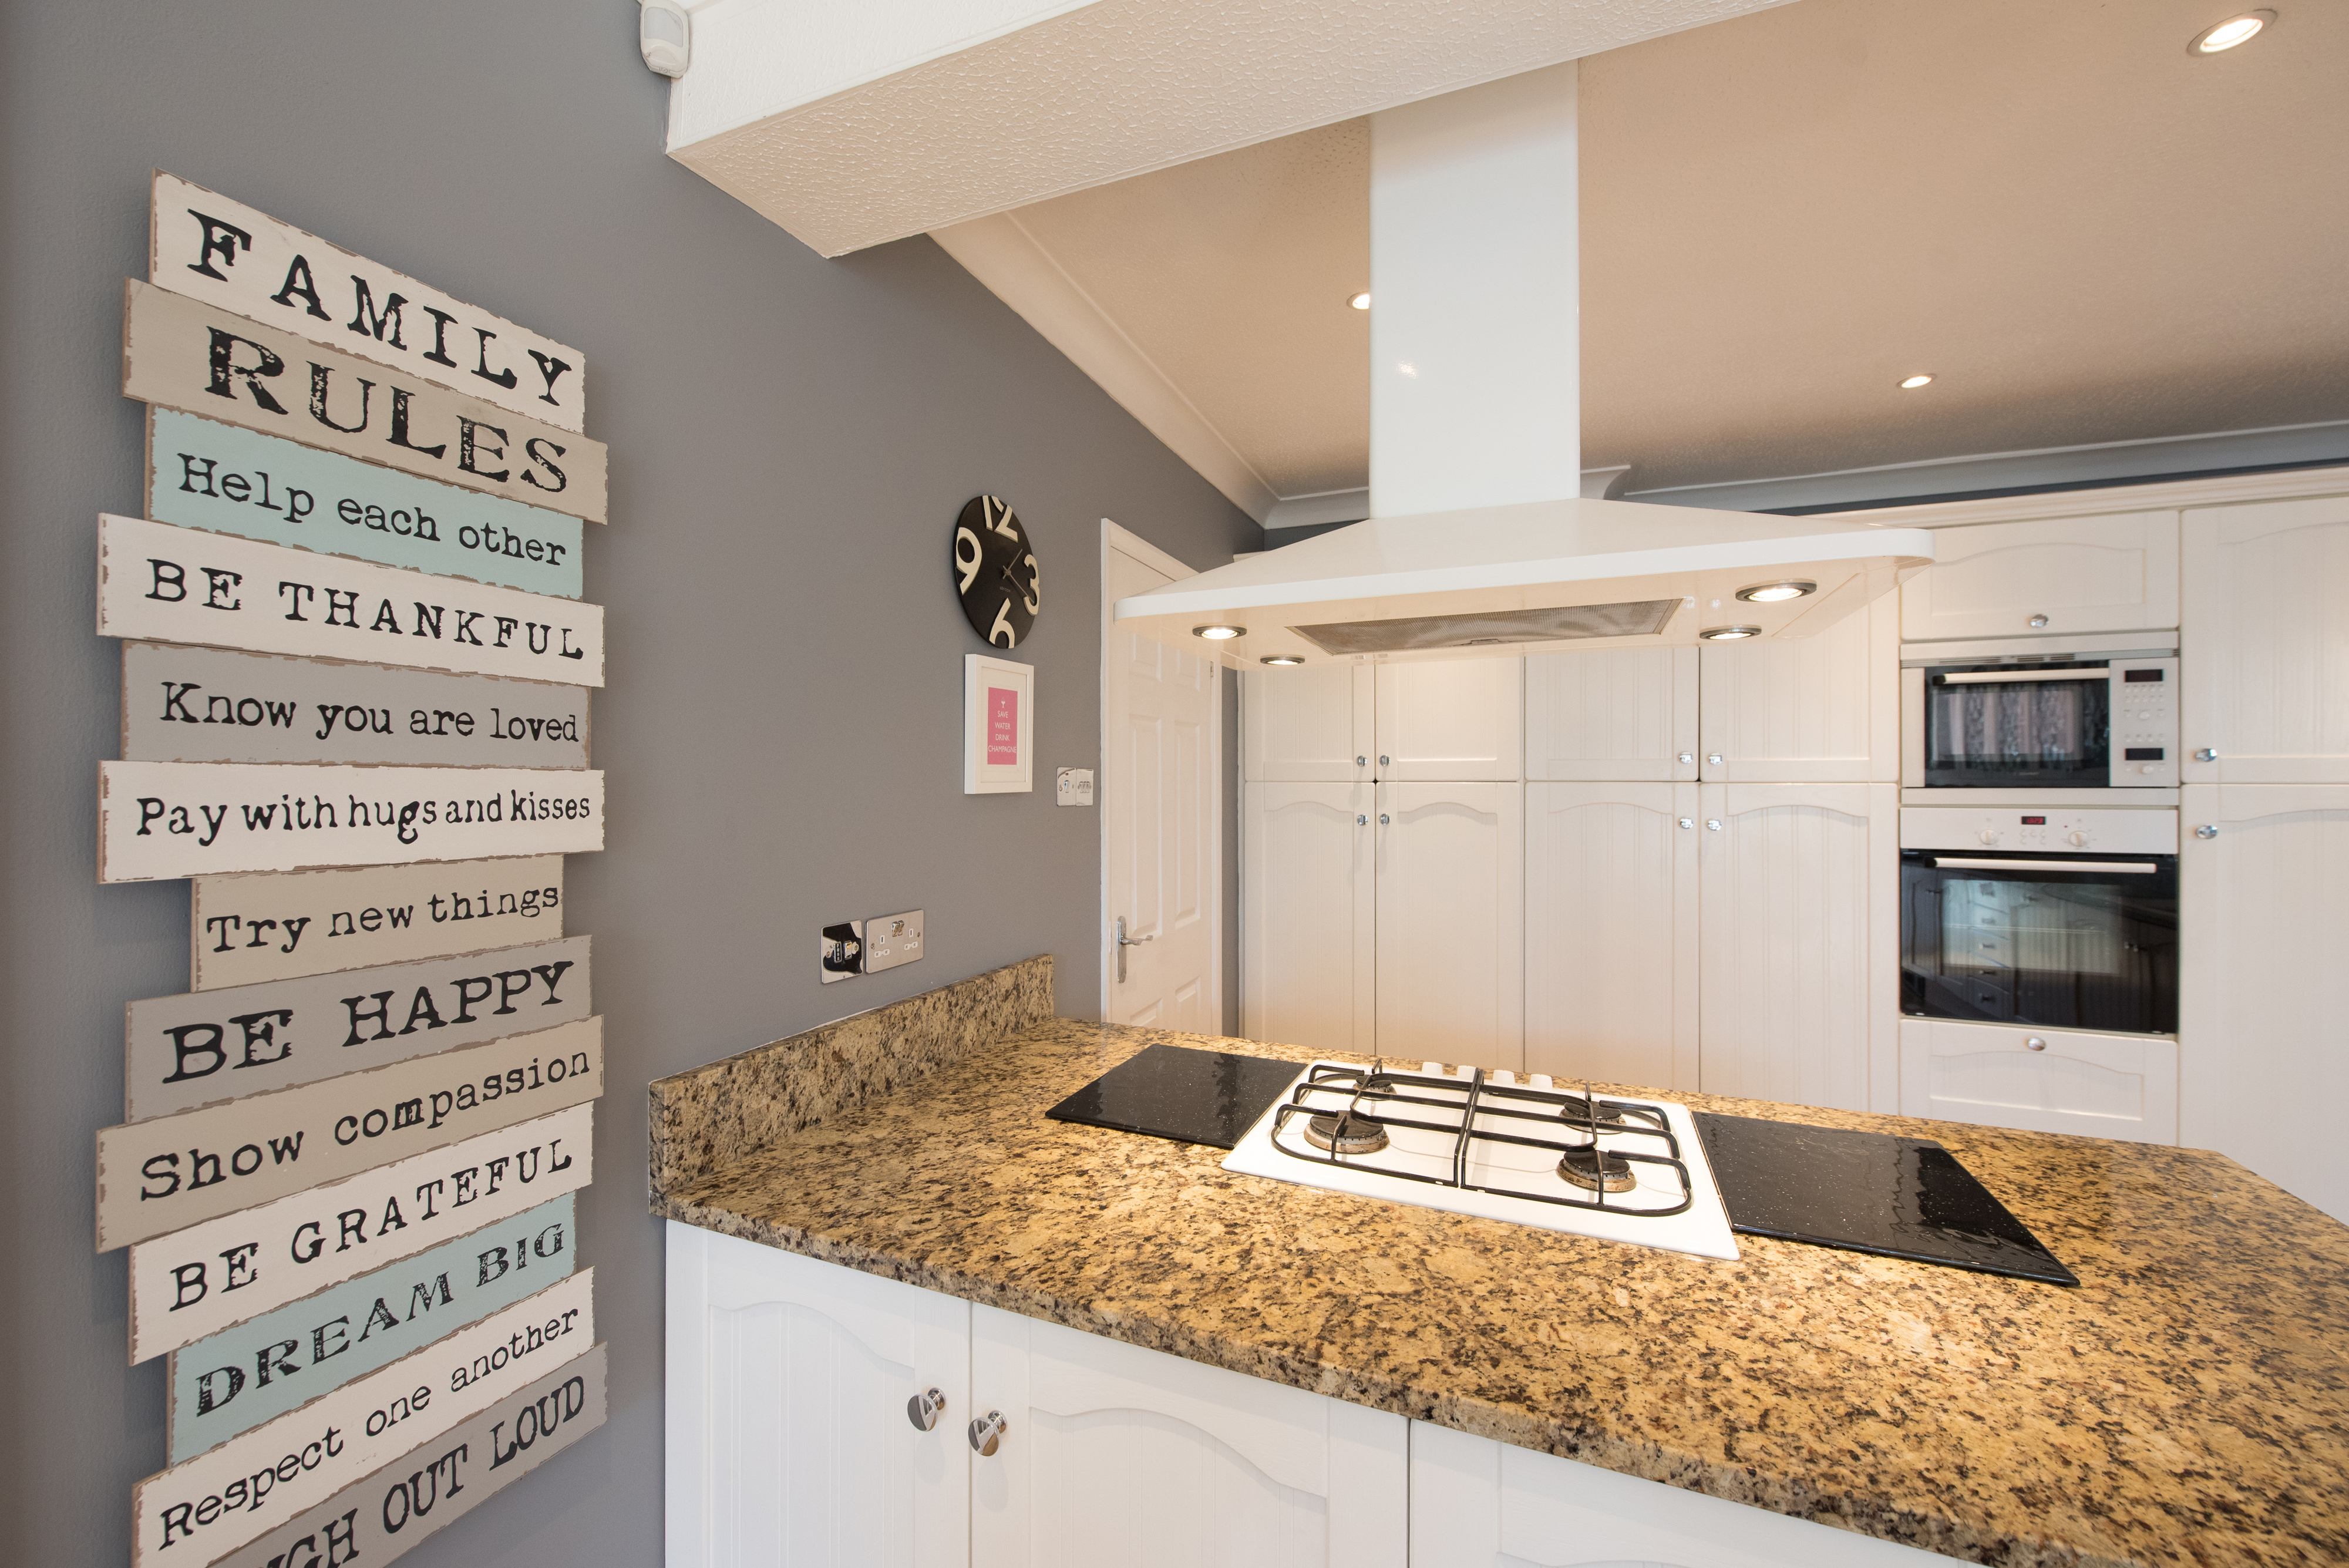 Modern kitchen interior with a list of family rules on the wall